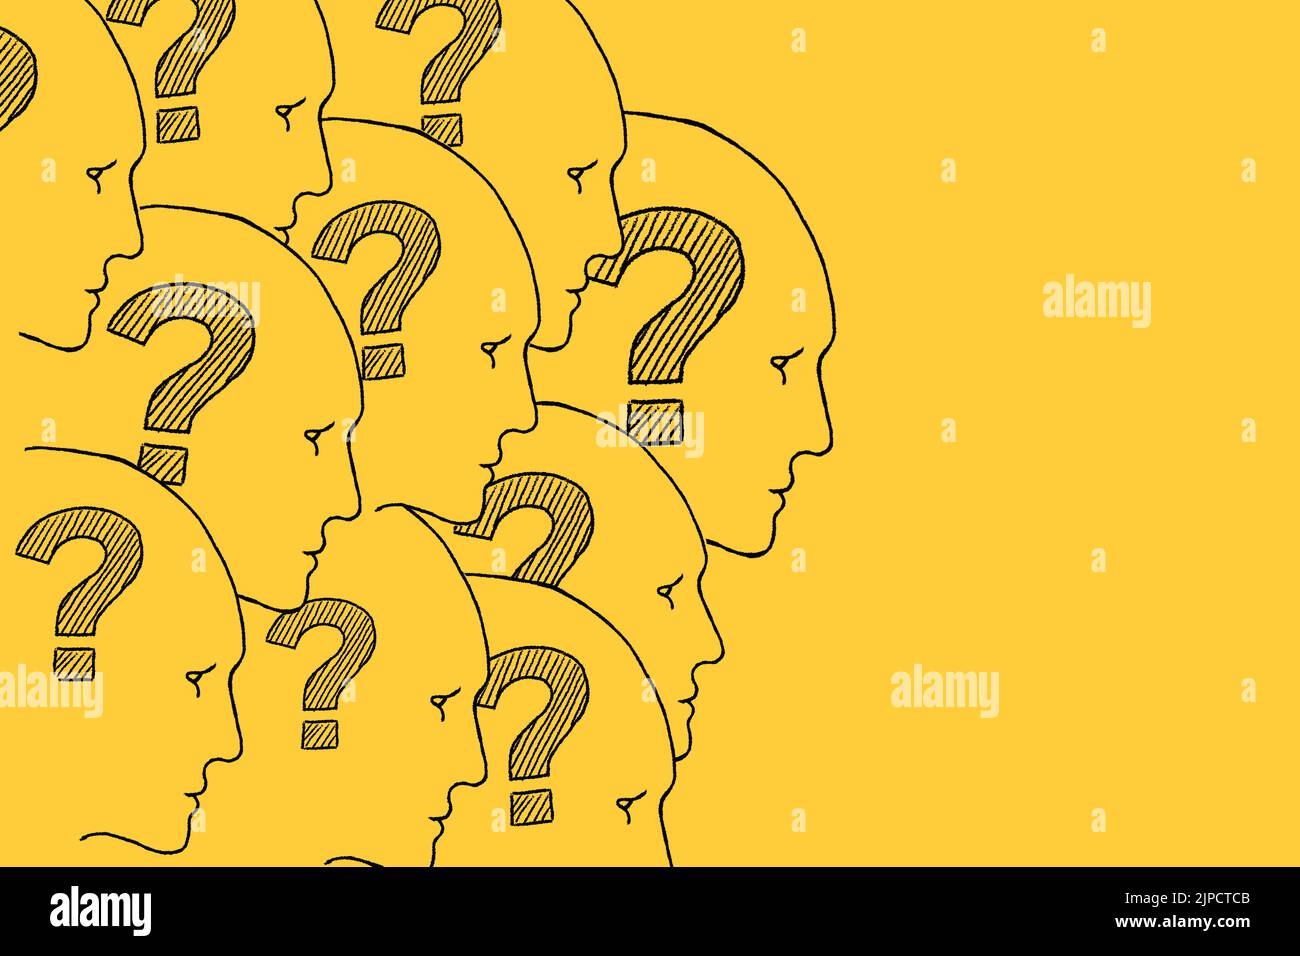 Human faces with question marks inside. Illustration on yellow background. FAQ. Stock Photo